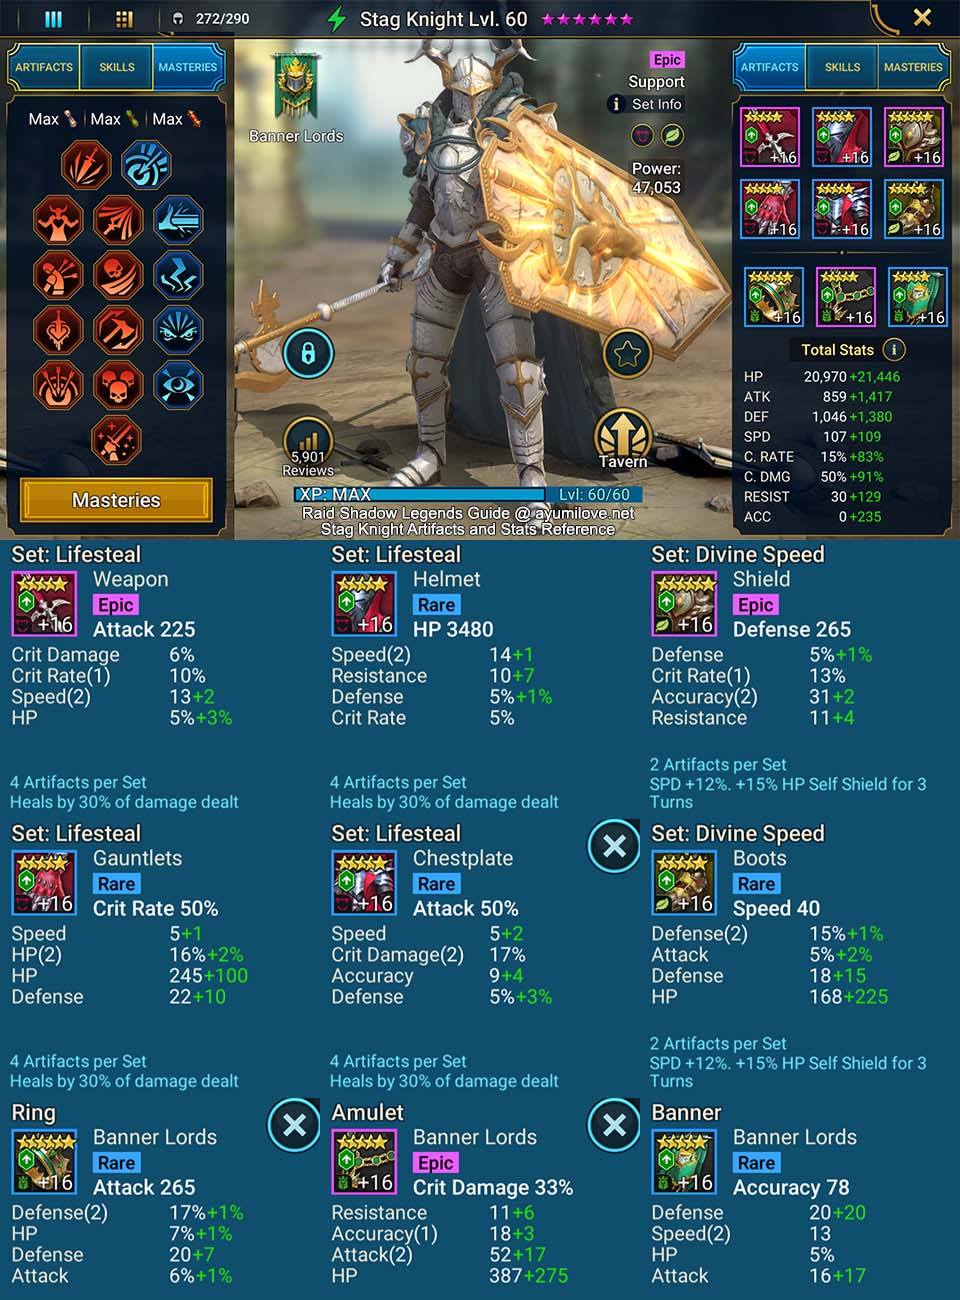 Raid Shadow Legends Stag Knight Artifacts and Stats Reference